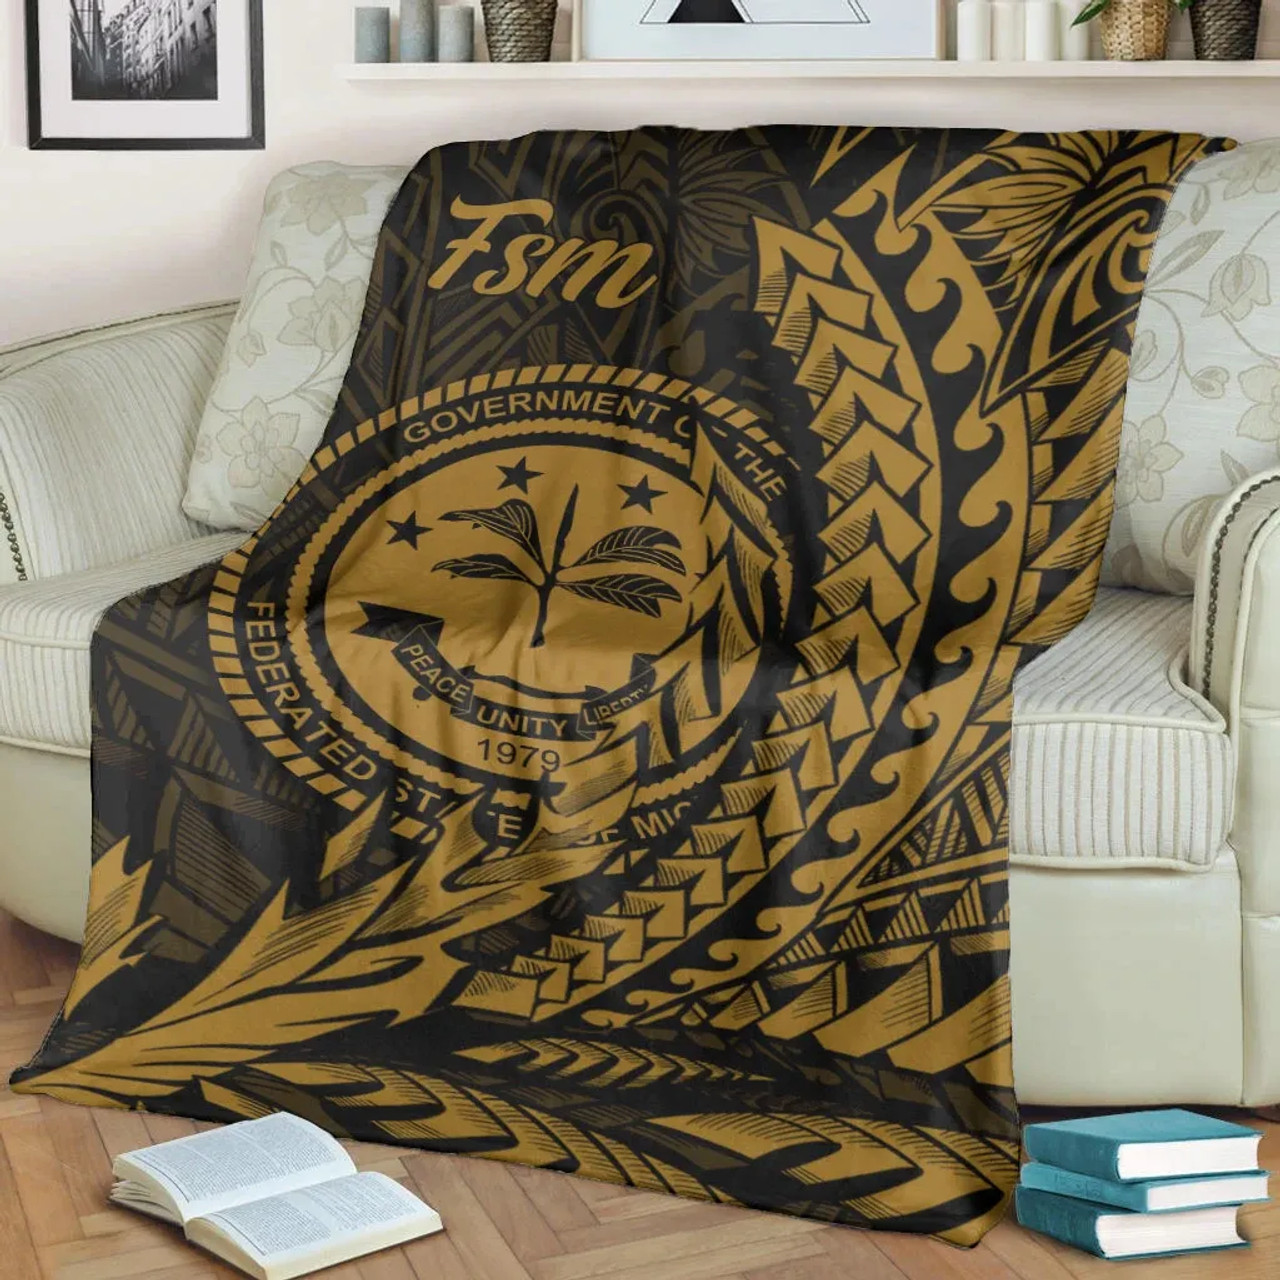 Federated States of Micronesia Premium Blanket - Wings style 1